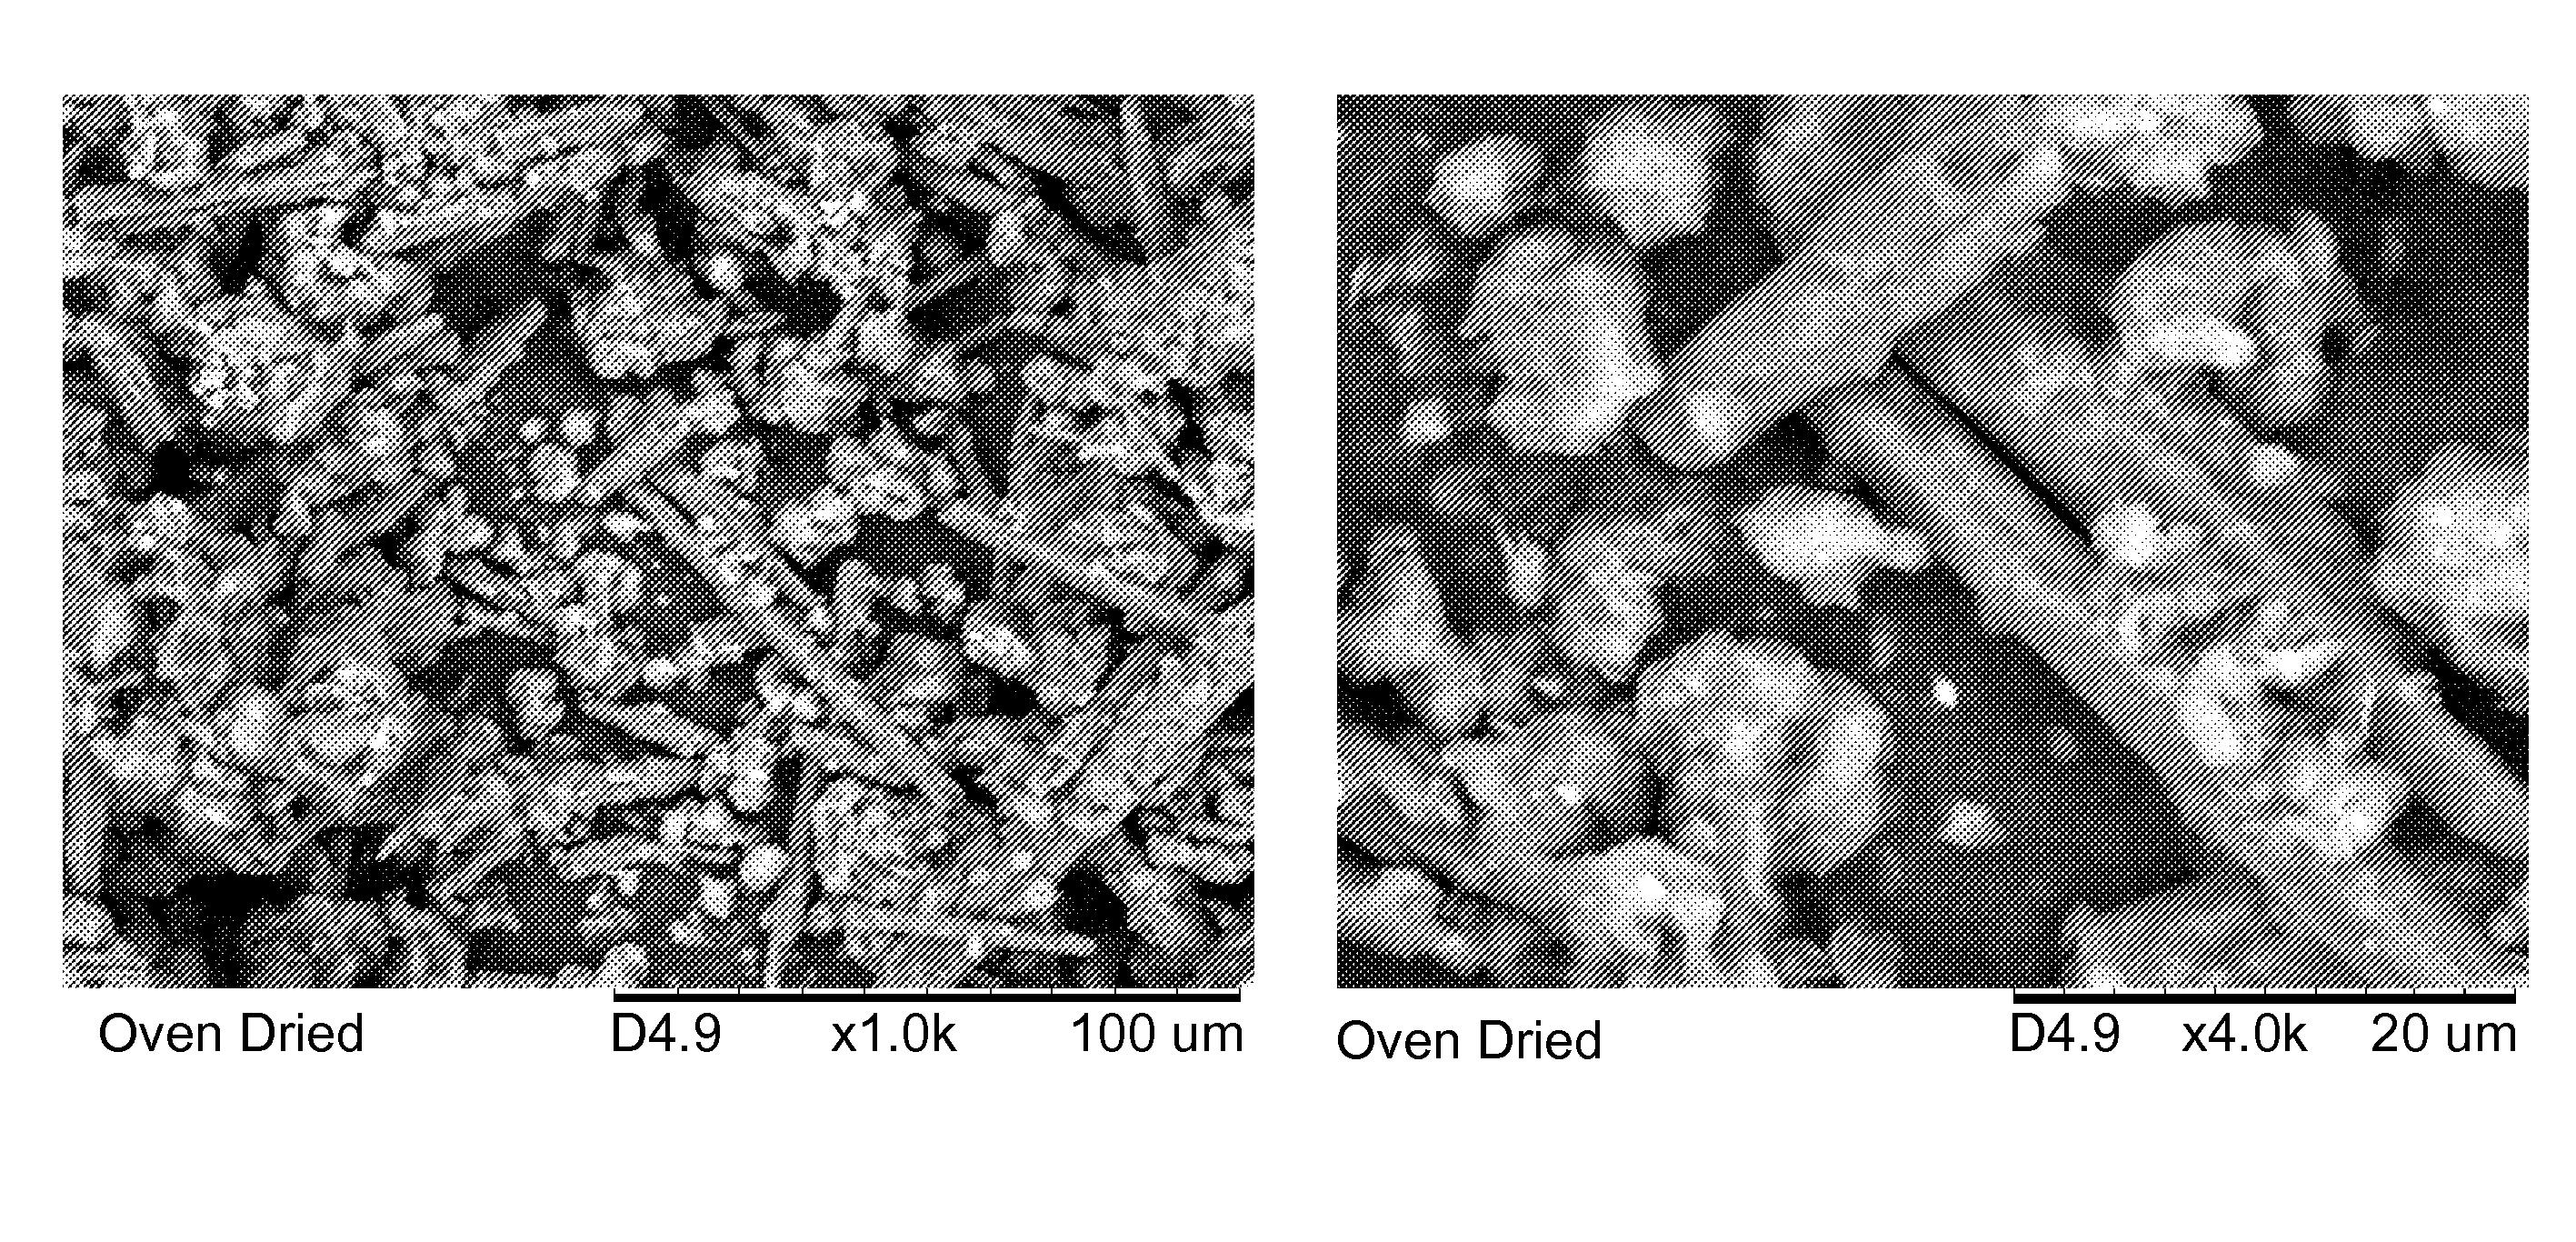 Rocks and aggregate, and methods of making and using the same